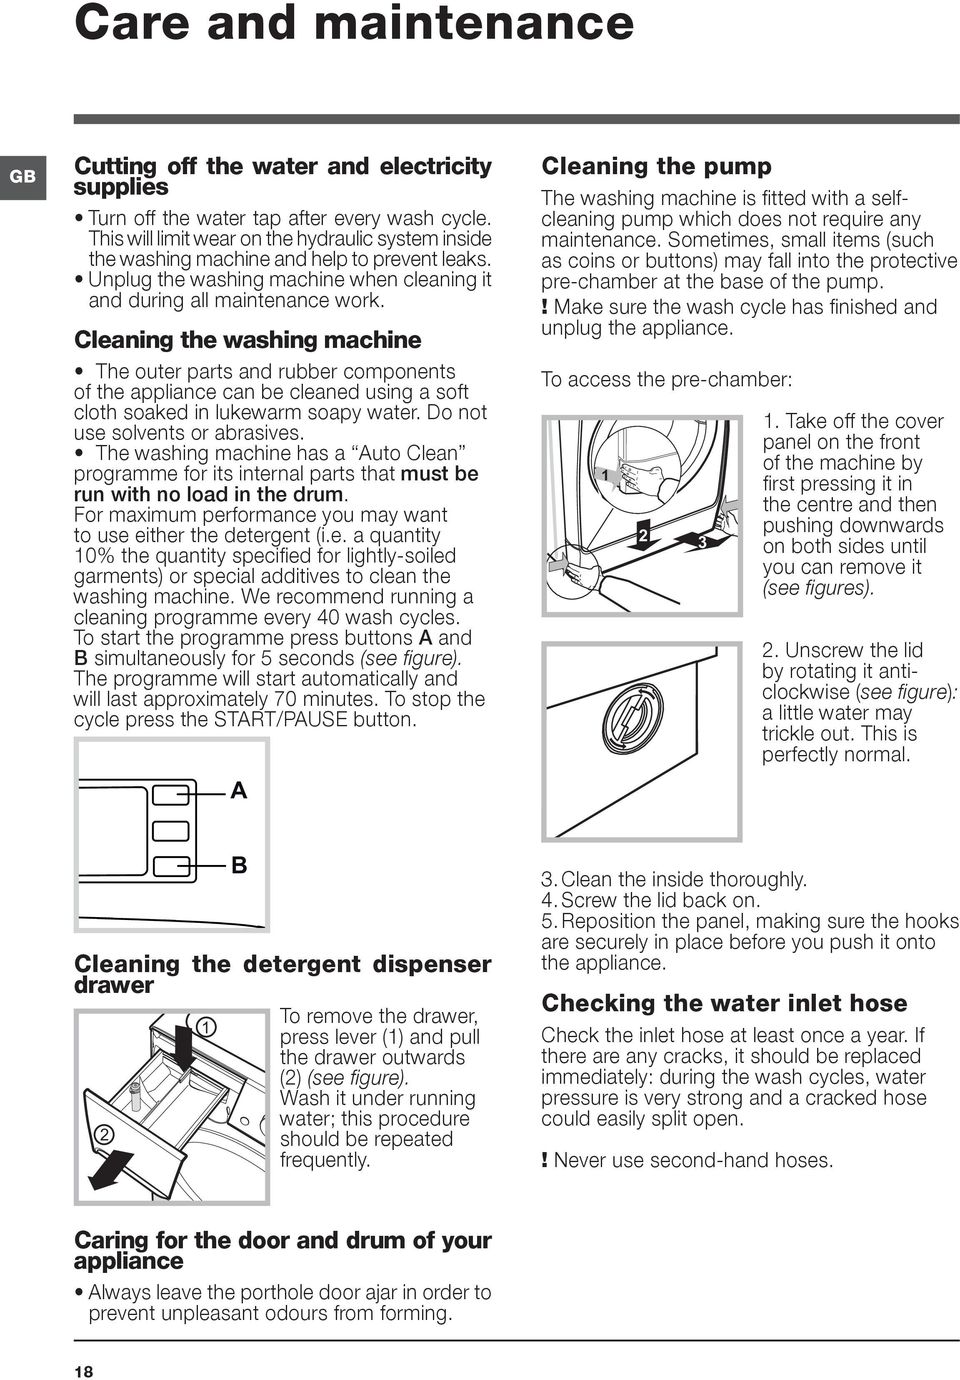 Cleaning the washing machine The outer parts and rubber components of the appliance can be cleaned using a soft cloth soaked in lukewarm soapy water. Do not use solvents or abrasives.